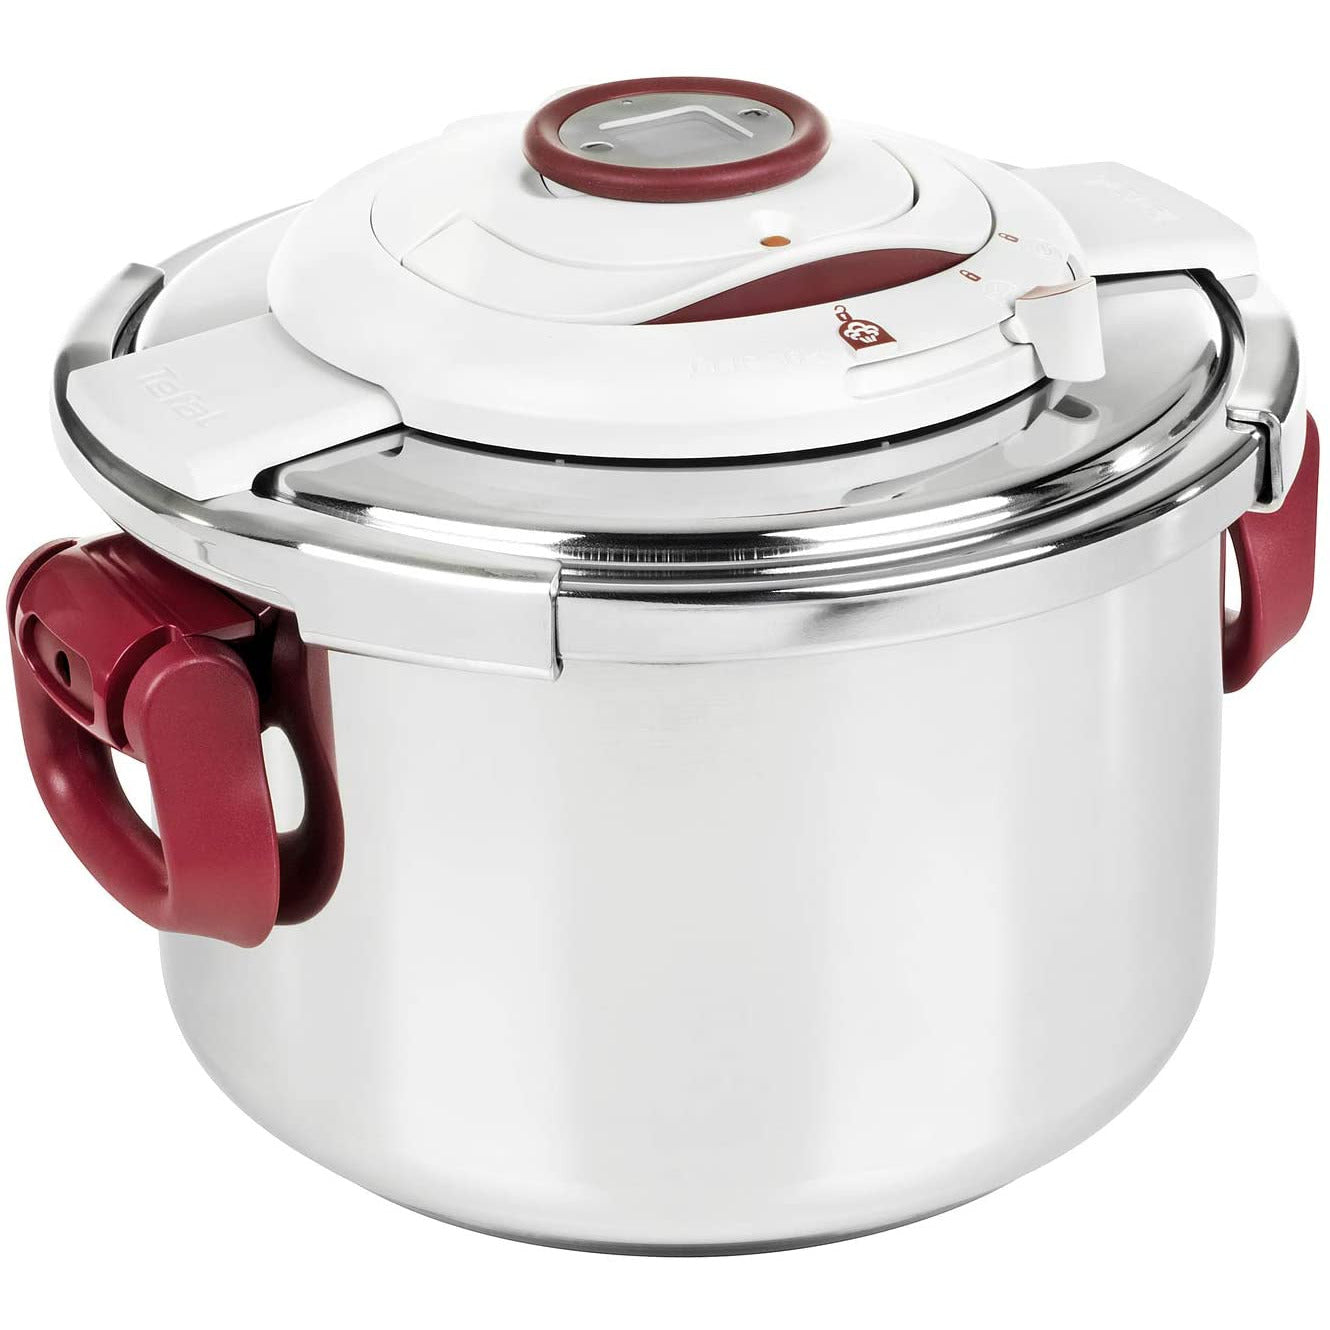 Tefal Pressure Cooker 4L by Tefal,Best Online Shopping Price in Mauritius